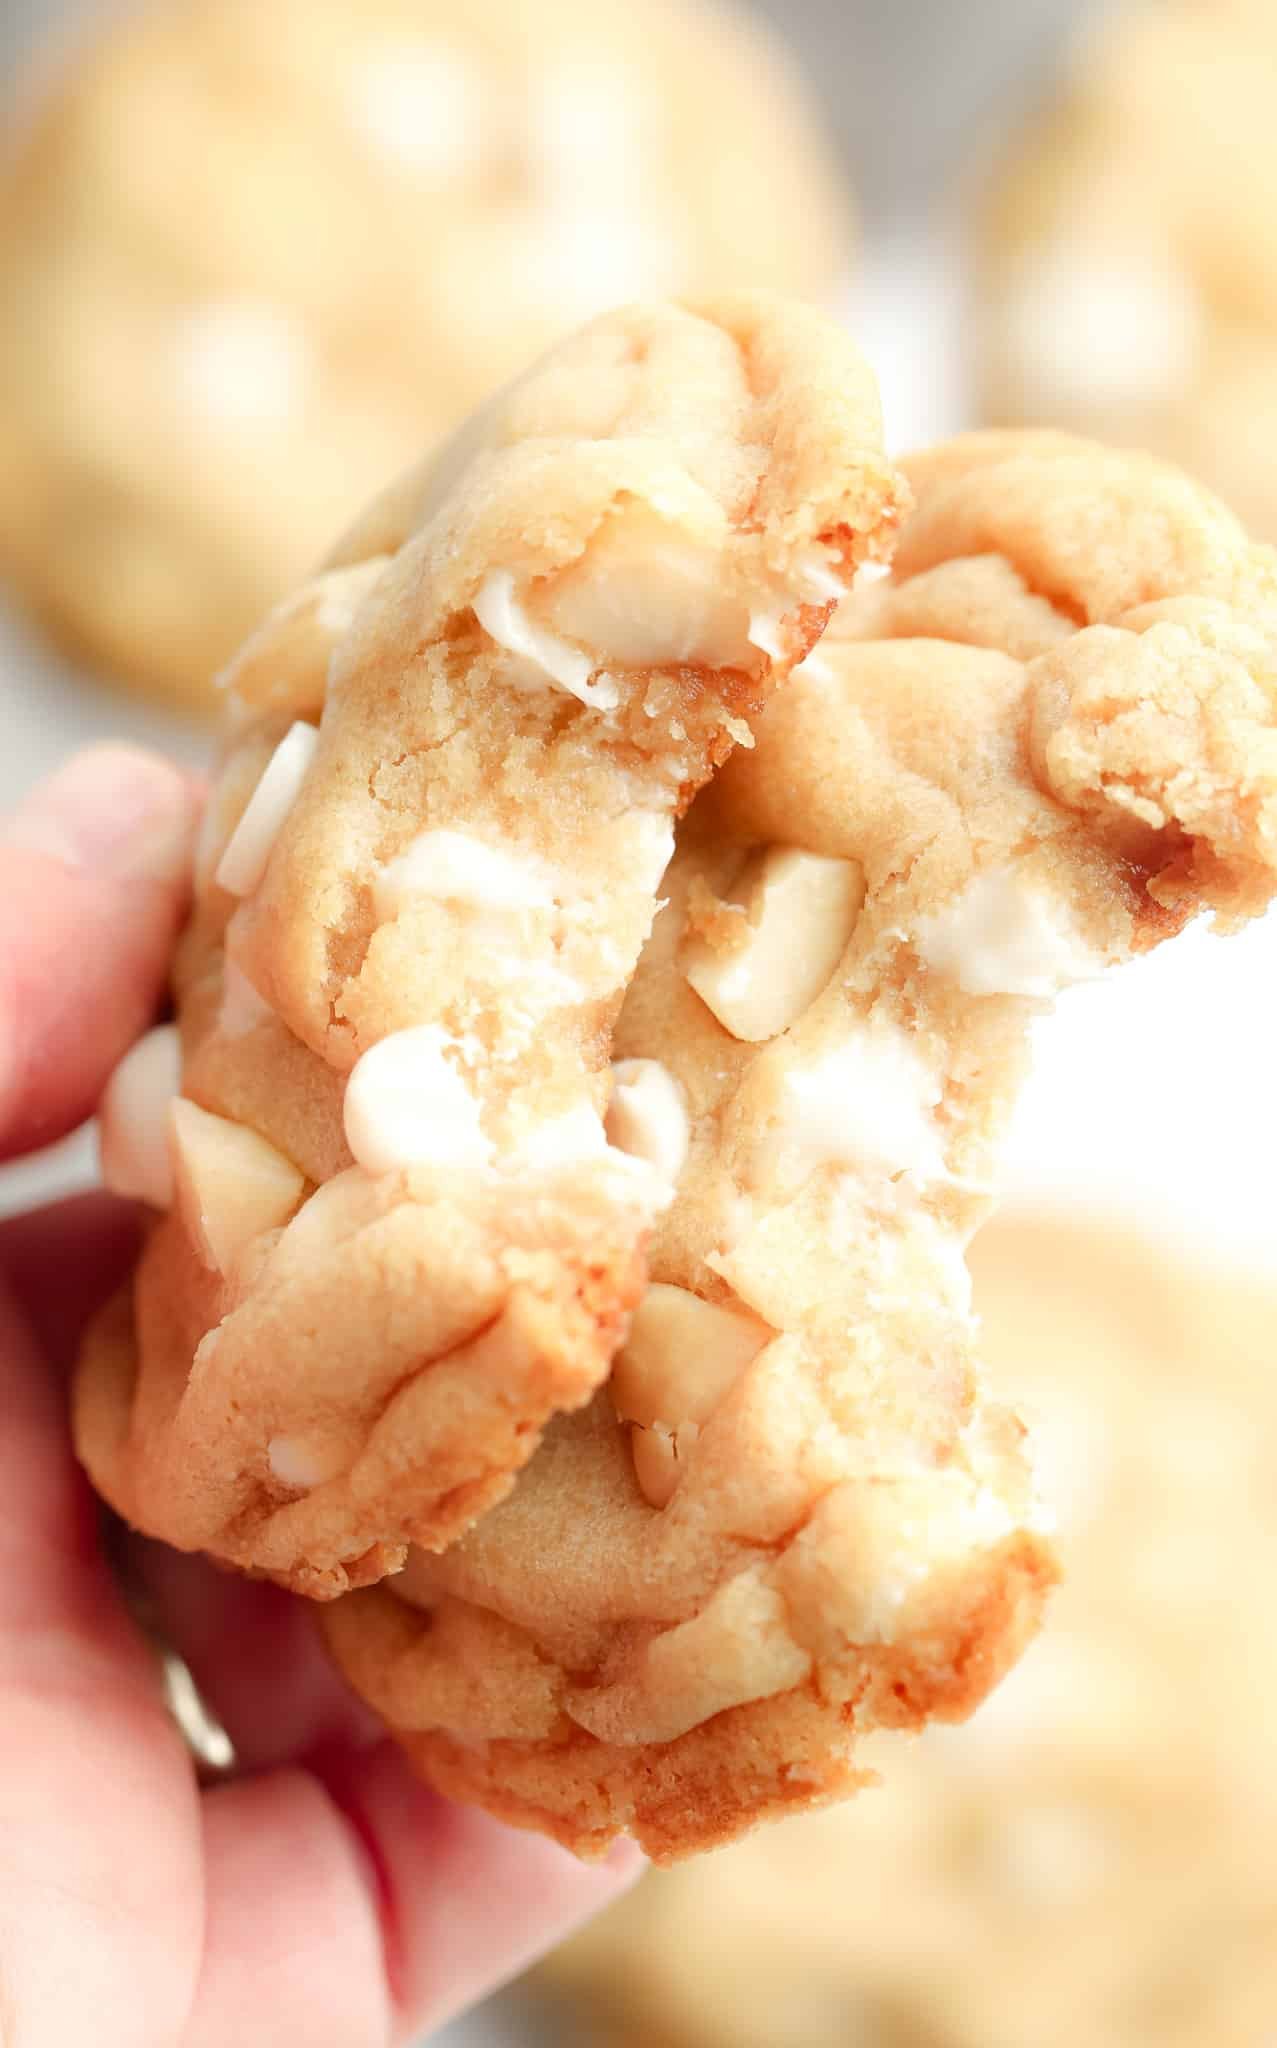 womans hand holding up two Vegan White Chocolate Macadamia Nut Cookies with bites taken out of them.